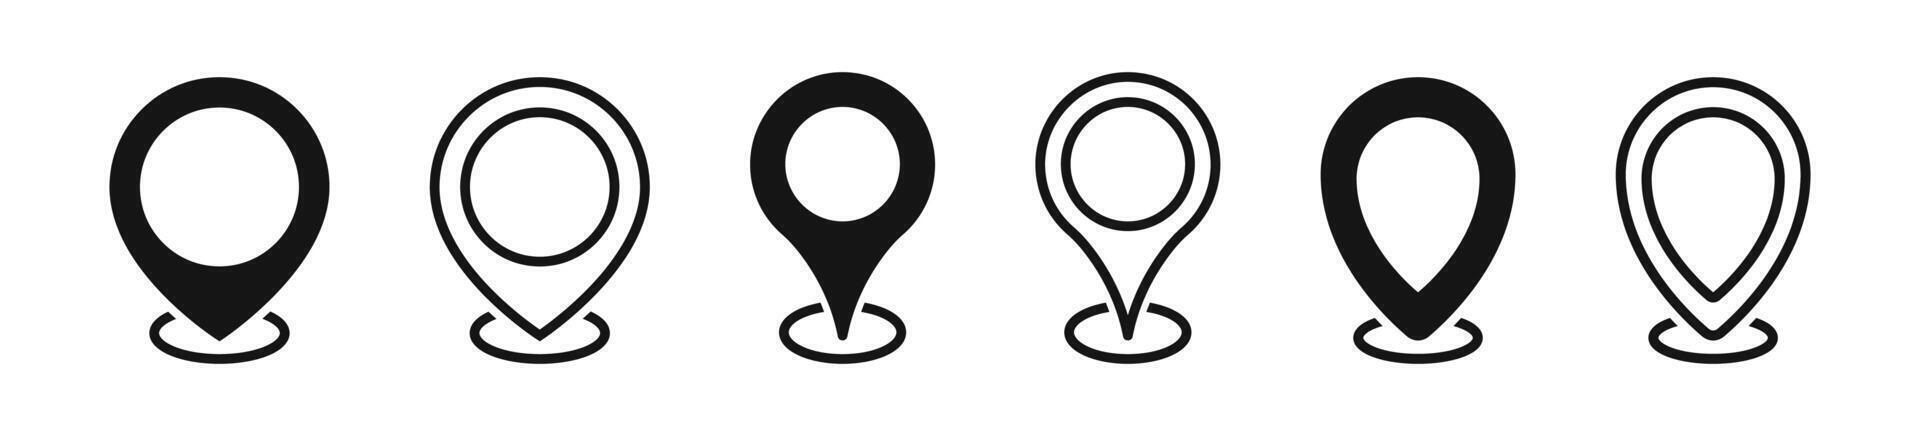 Location pointer flat icons. Map pin icon. vector